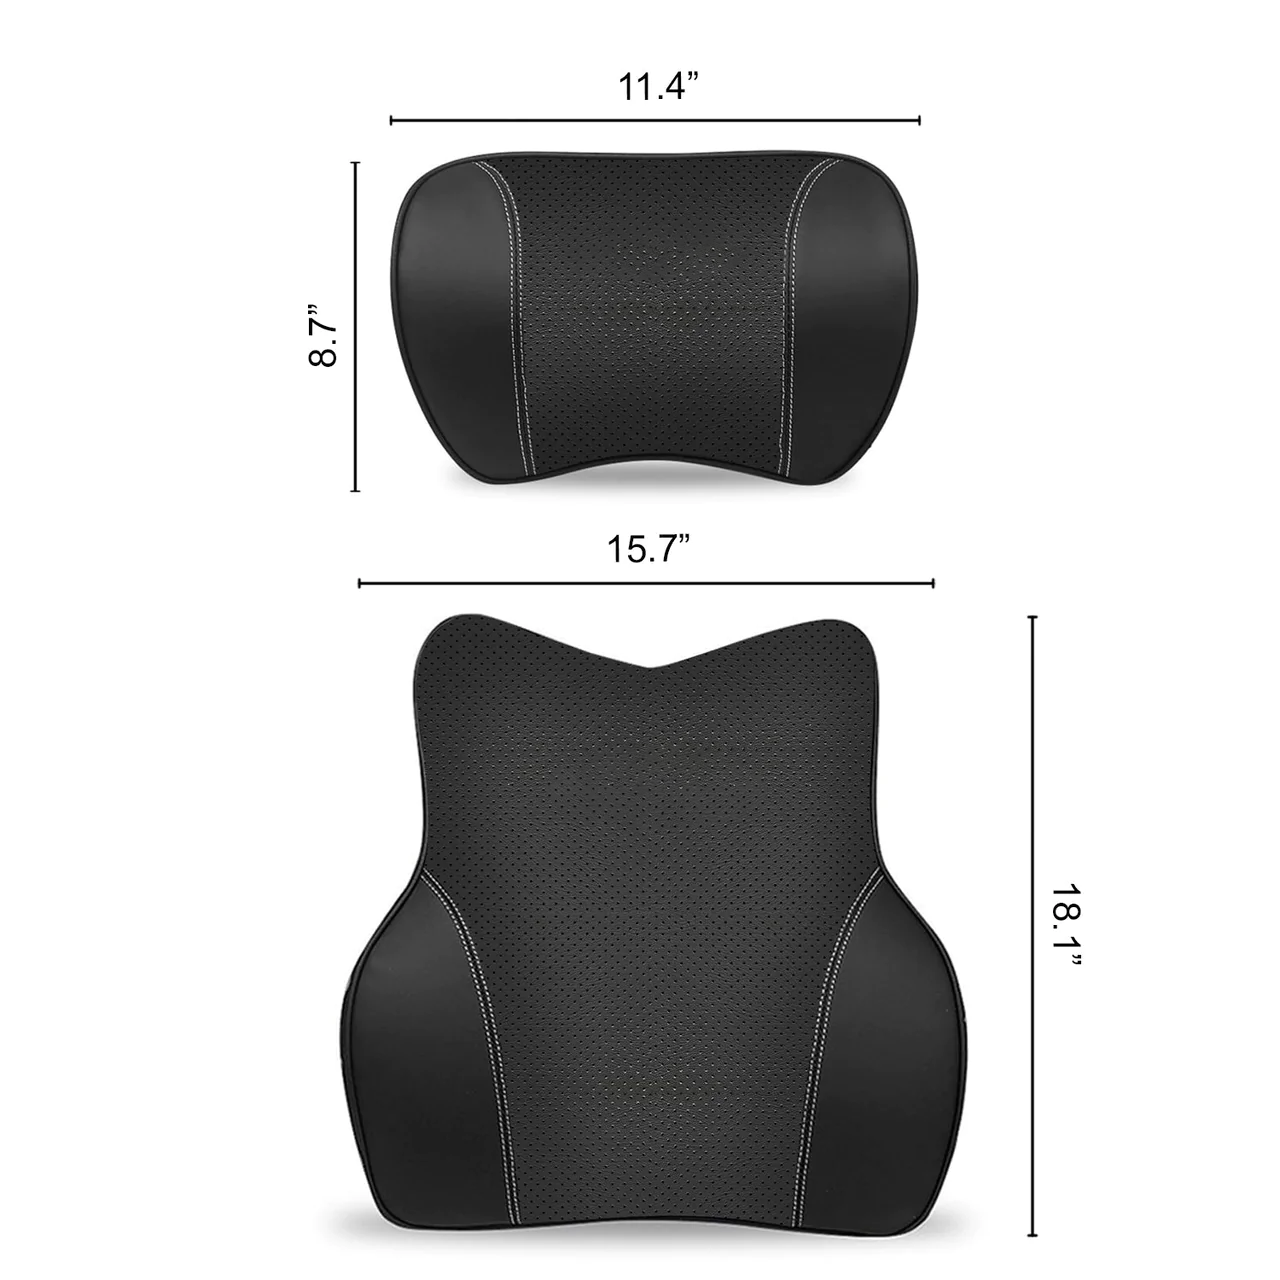 Custom Text For Car Headrest Neck Pillow and Lumbar Support Back Cushion Kit, Compatible with All Cars, Memory Foam Erognomic Design Universal Fit Muscle Pain and Tension Relief for Car Seat TS13992